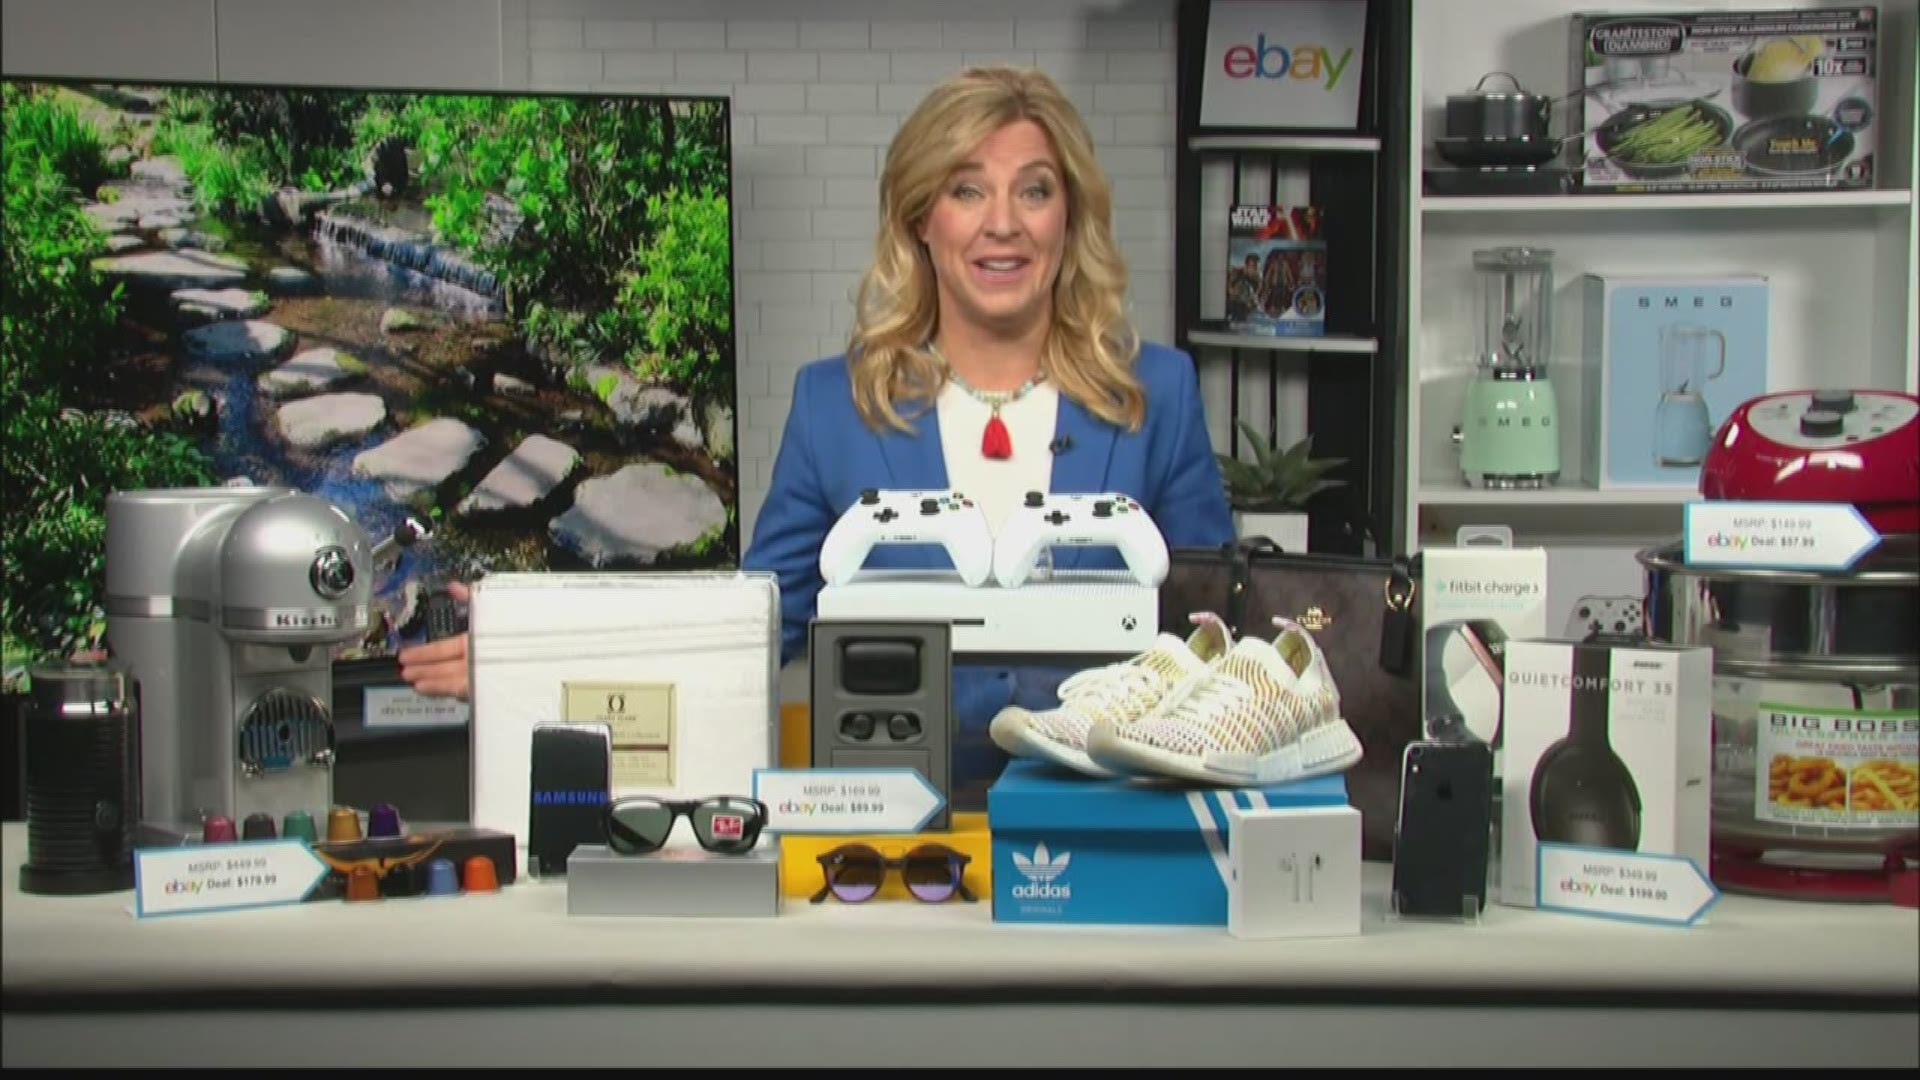 Tech expert Jennifer Jolly shares tips to take advantage of when it comes to hot summer deals!